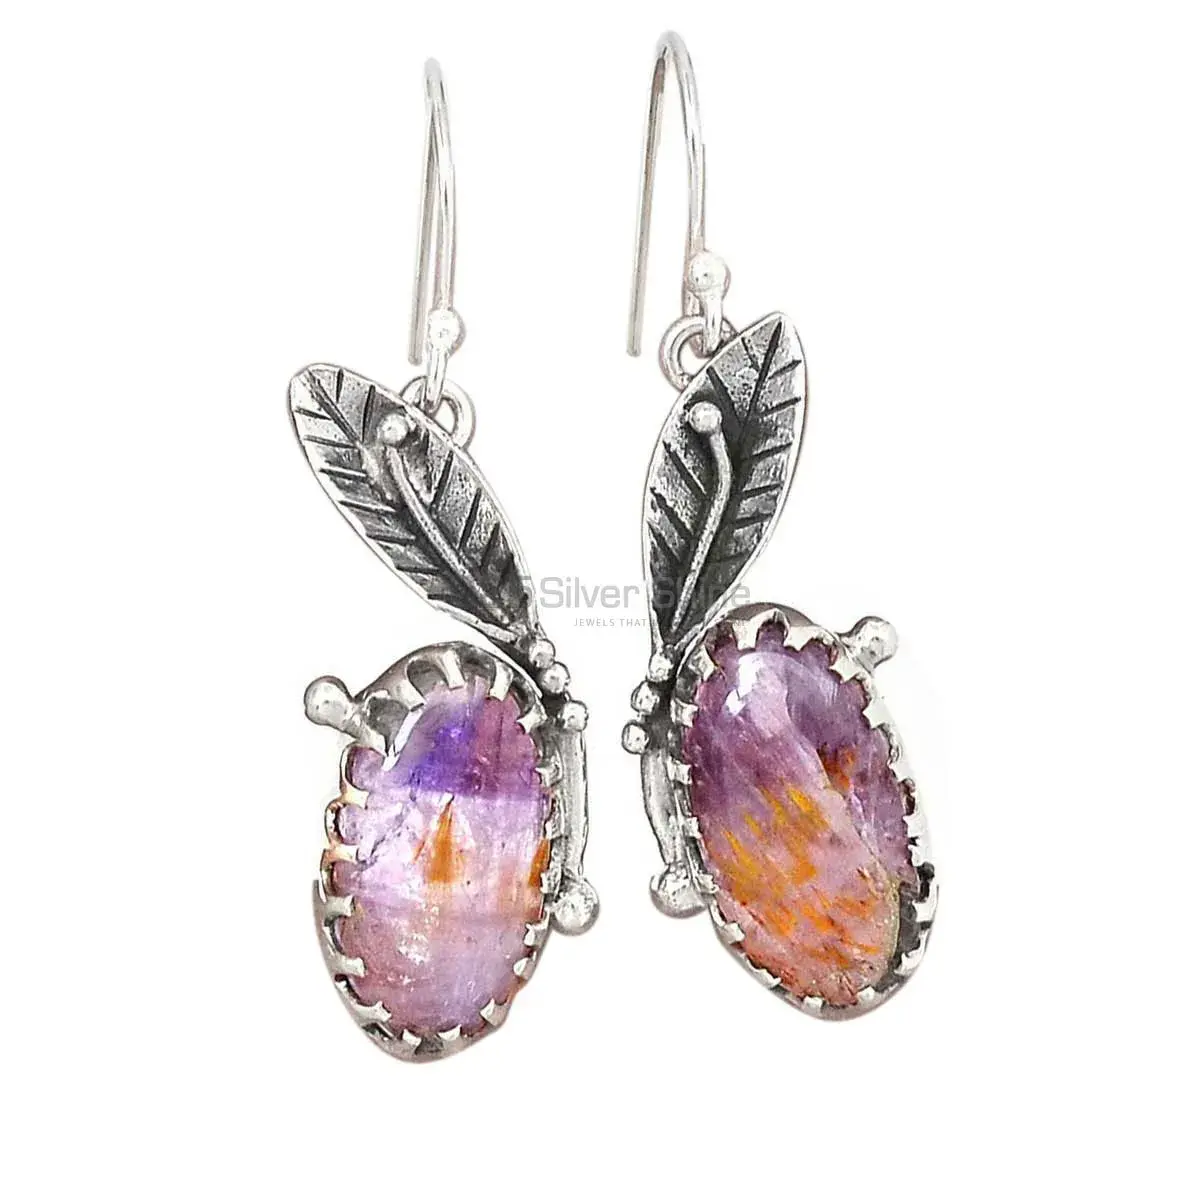 Unique 925 Sterling Silver Handmade Earrings Exporters In Cacoxenite Gemstone Jewelry 925SE2484